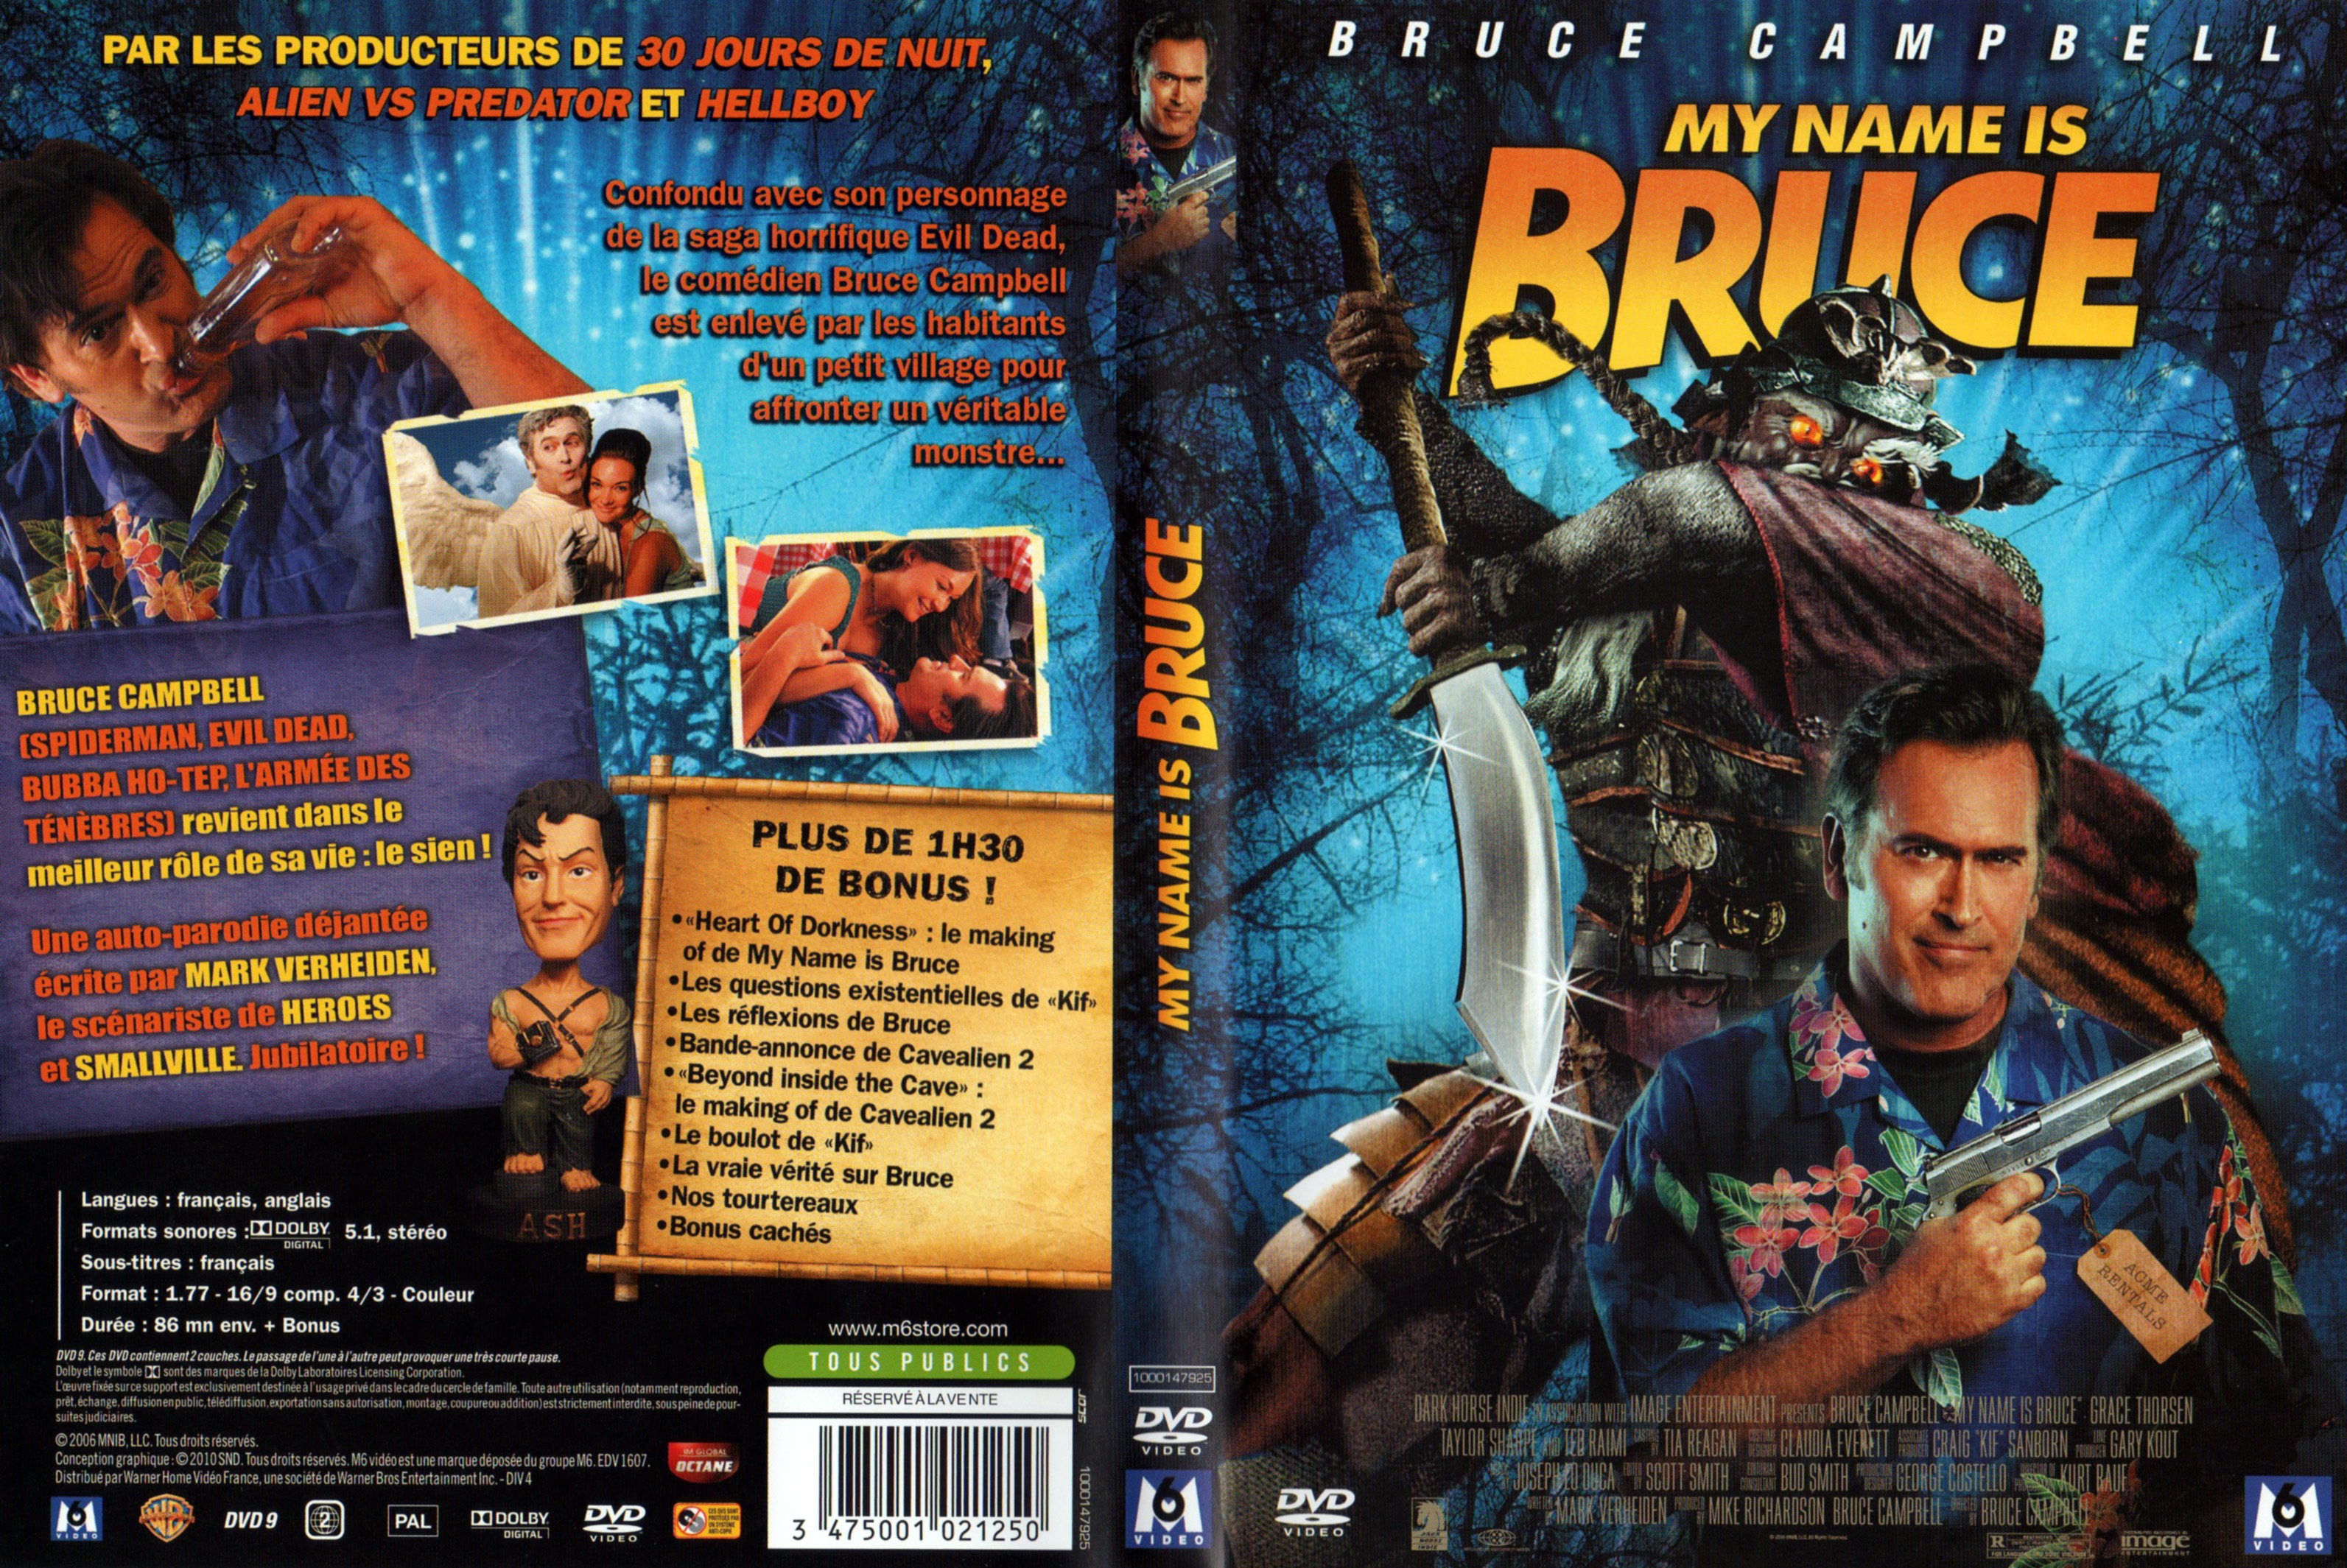 Jaquette DVD My name is Bruce